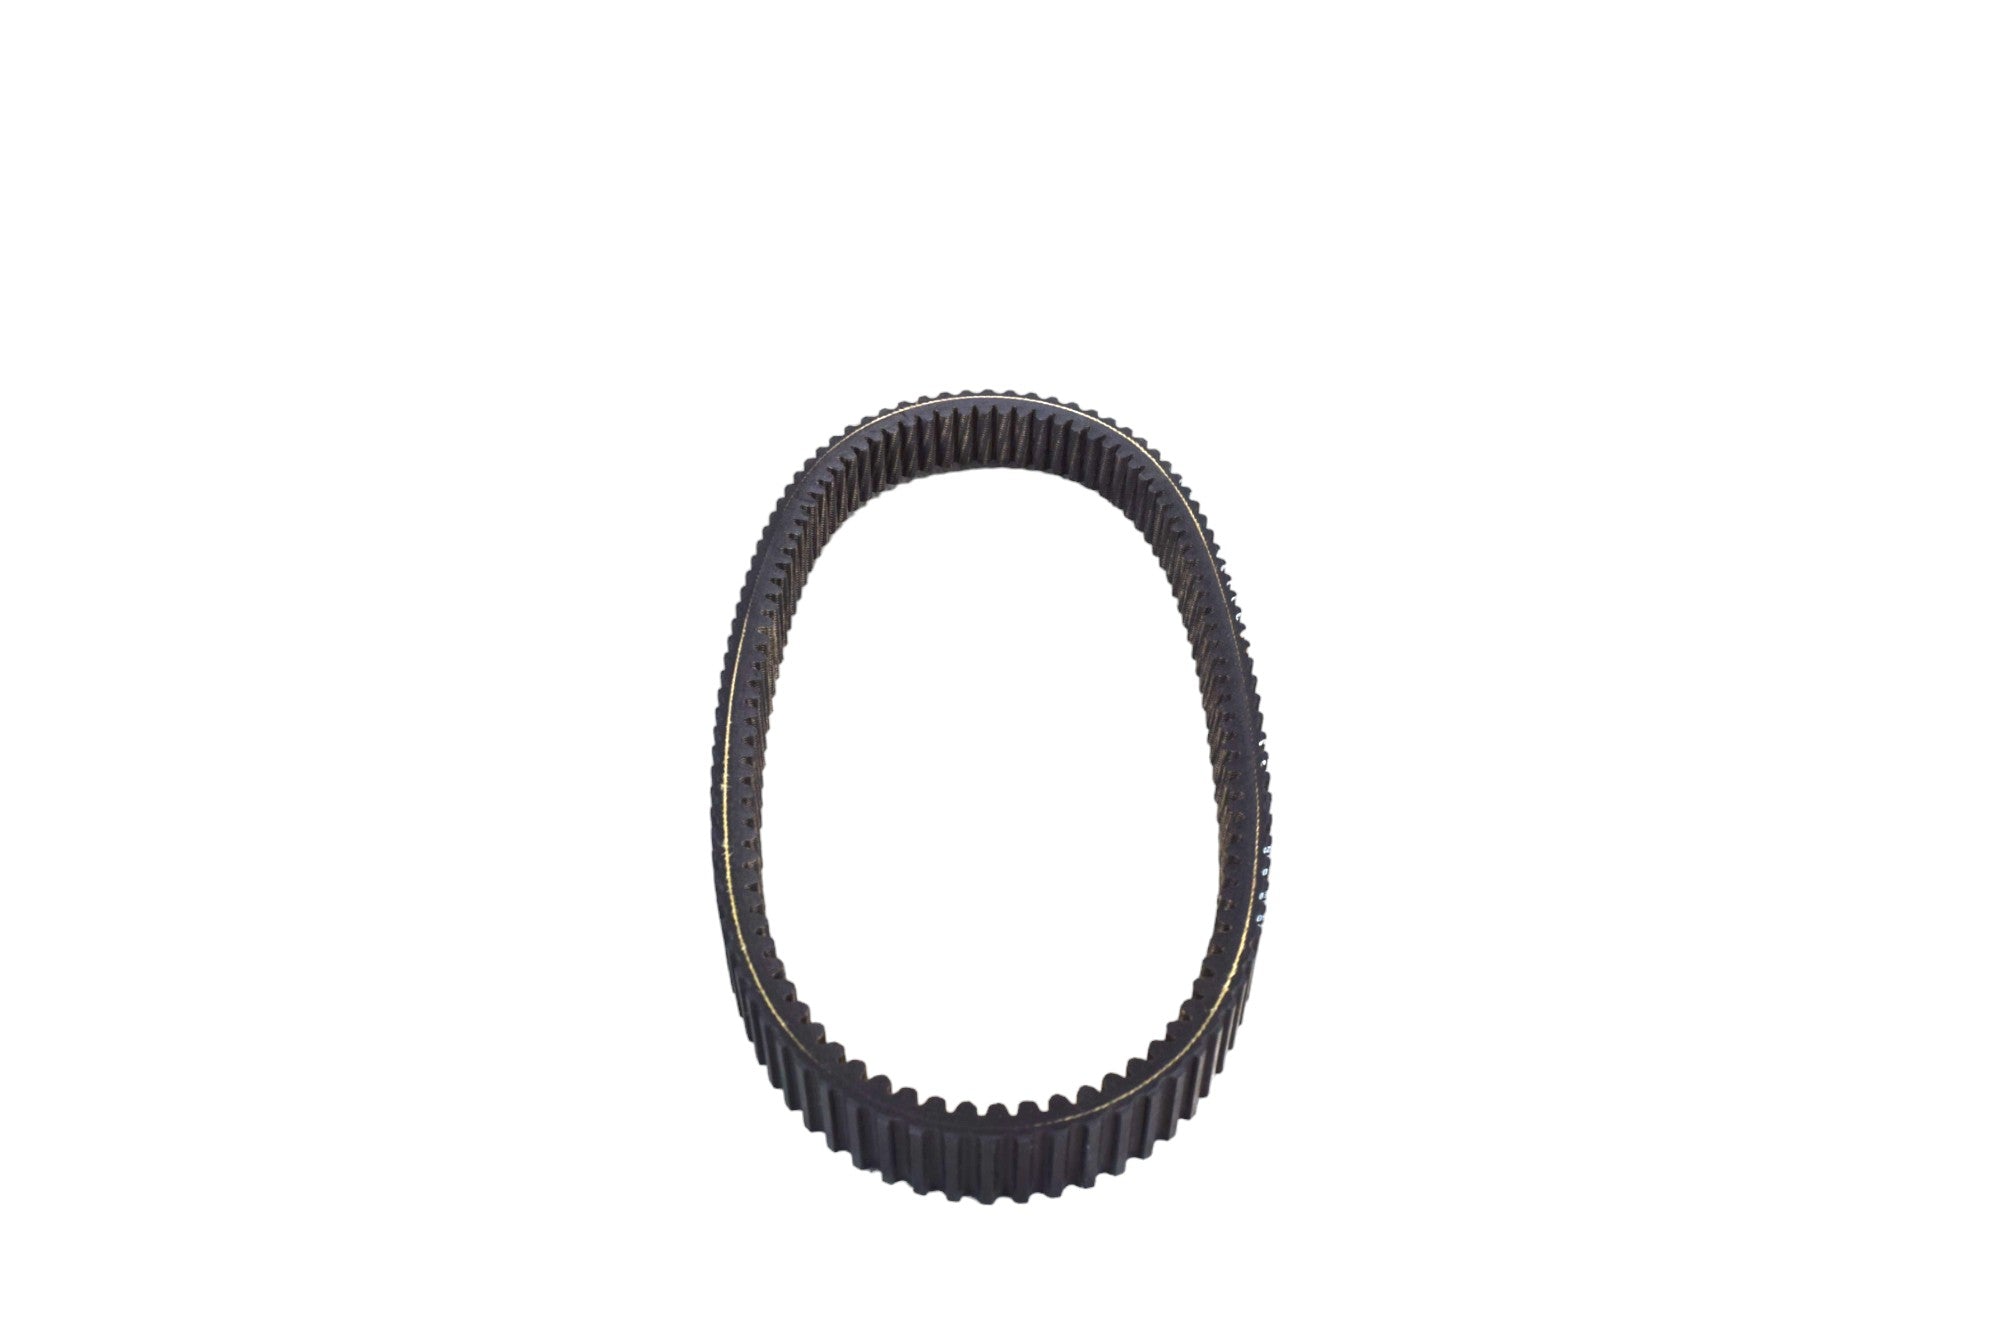 Ultimax UXP485 Drive Belt for CF Moto OEM Replacement for 0JWA-055000-10000, 0JWA-055000 (Made in USA)